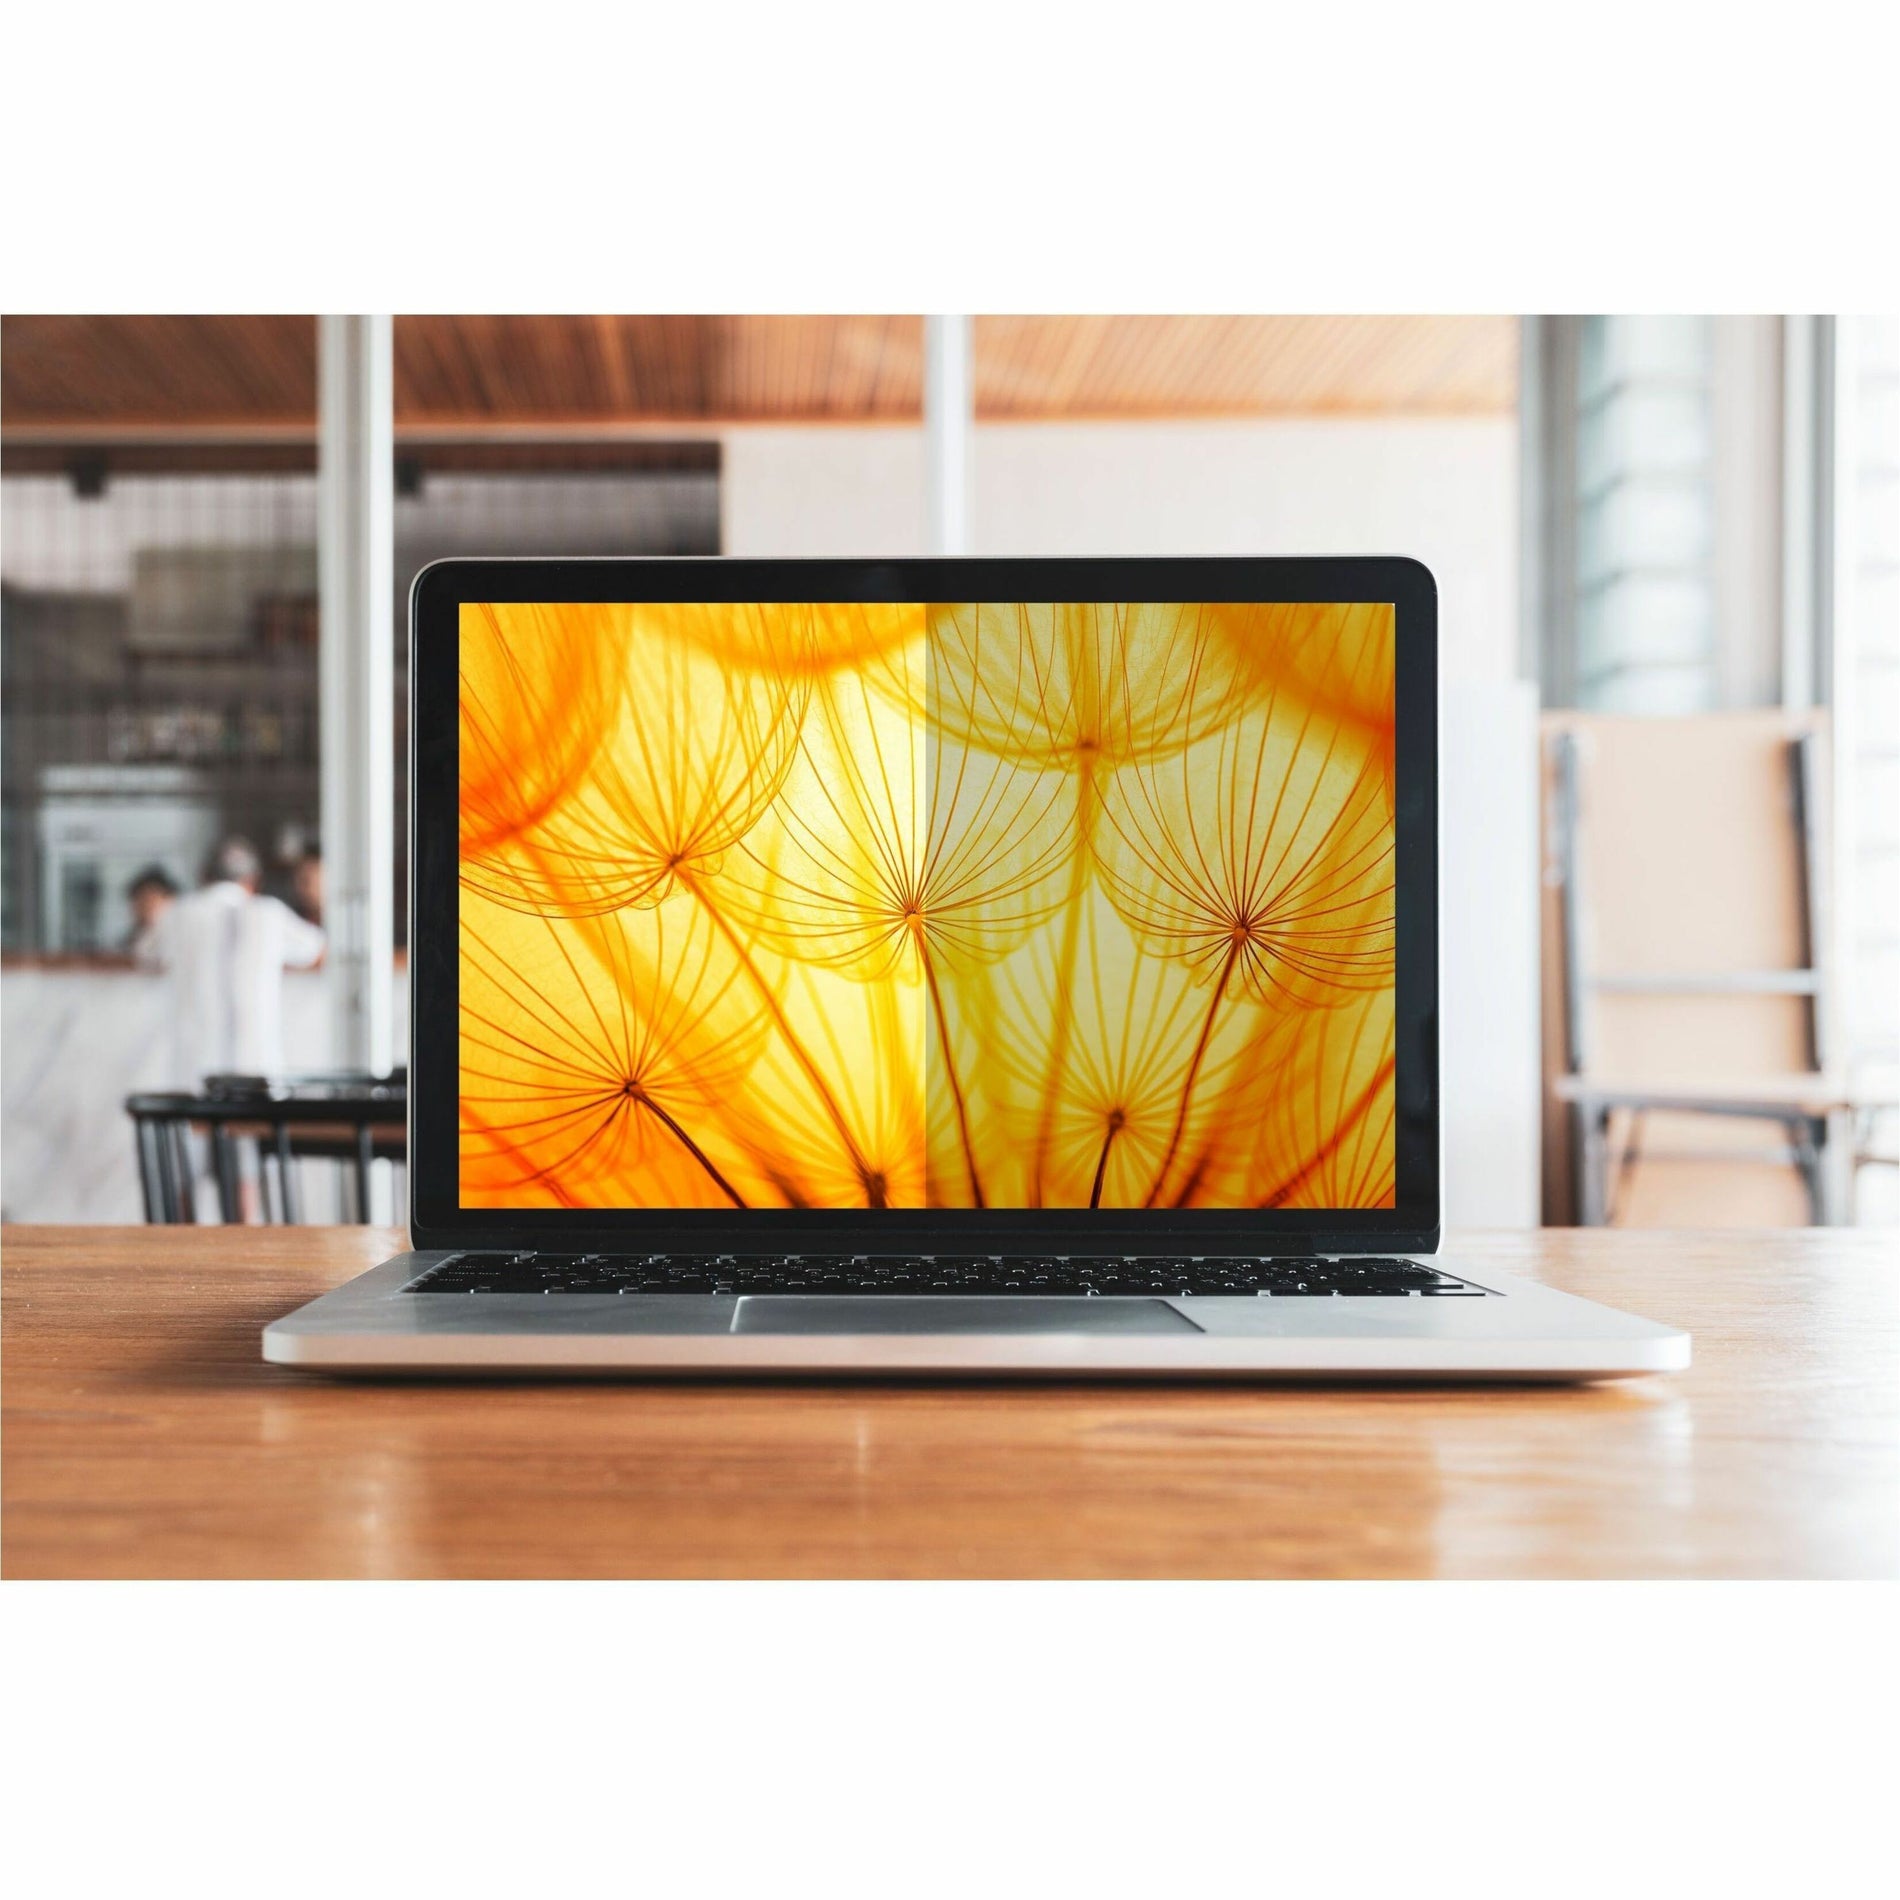 3M BP123C3E Bright Screen Privacy Filter for 12.3in Full Screen Laptop, 3:2, Reversible Matte-to-Glossy, Blue Light Reduction